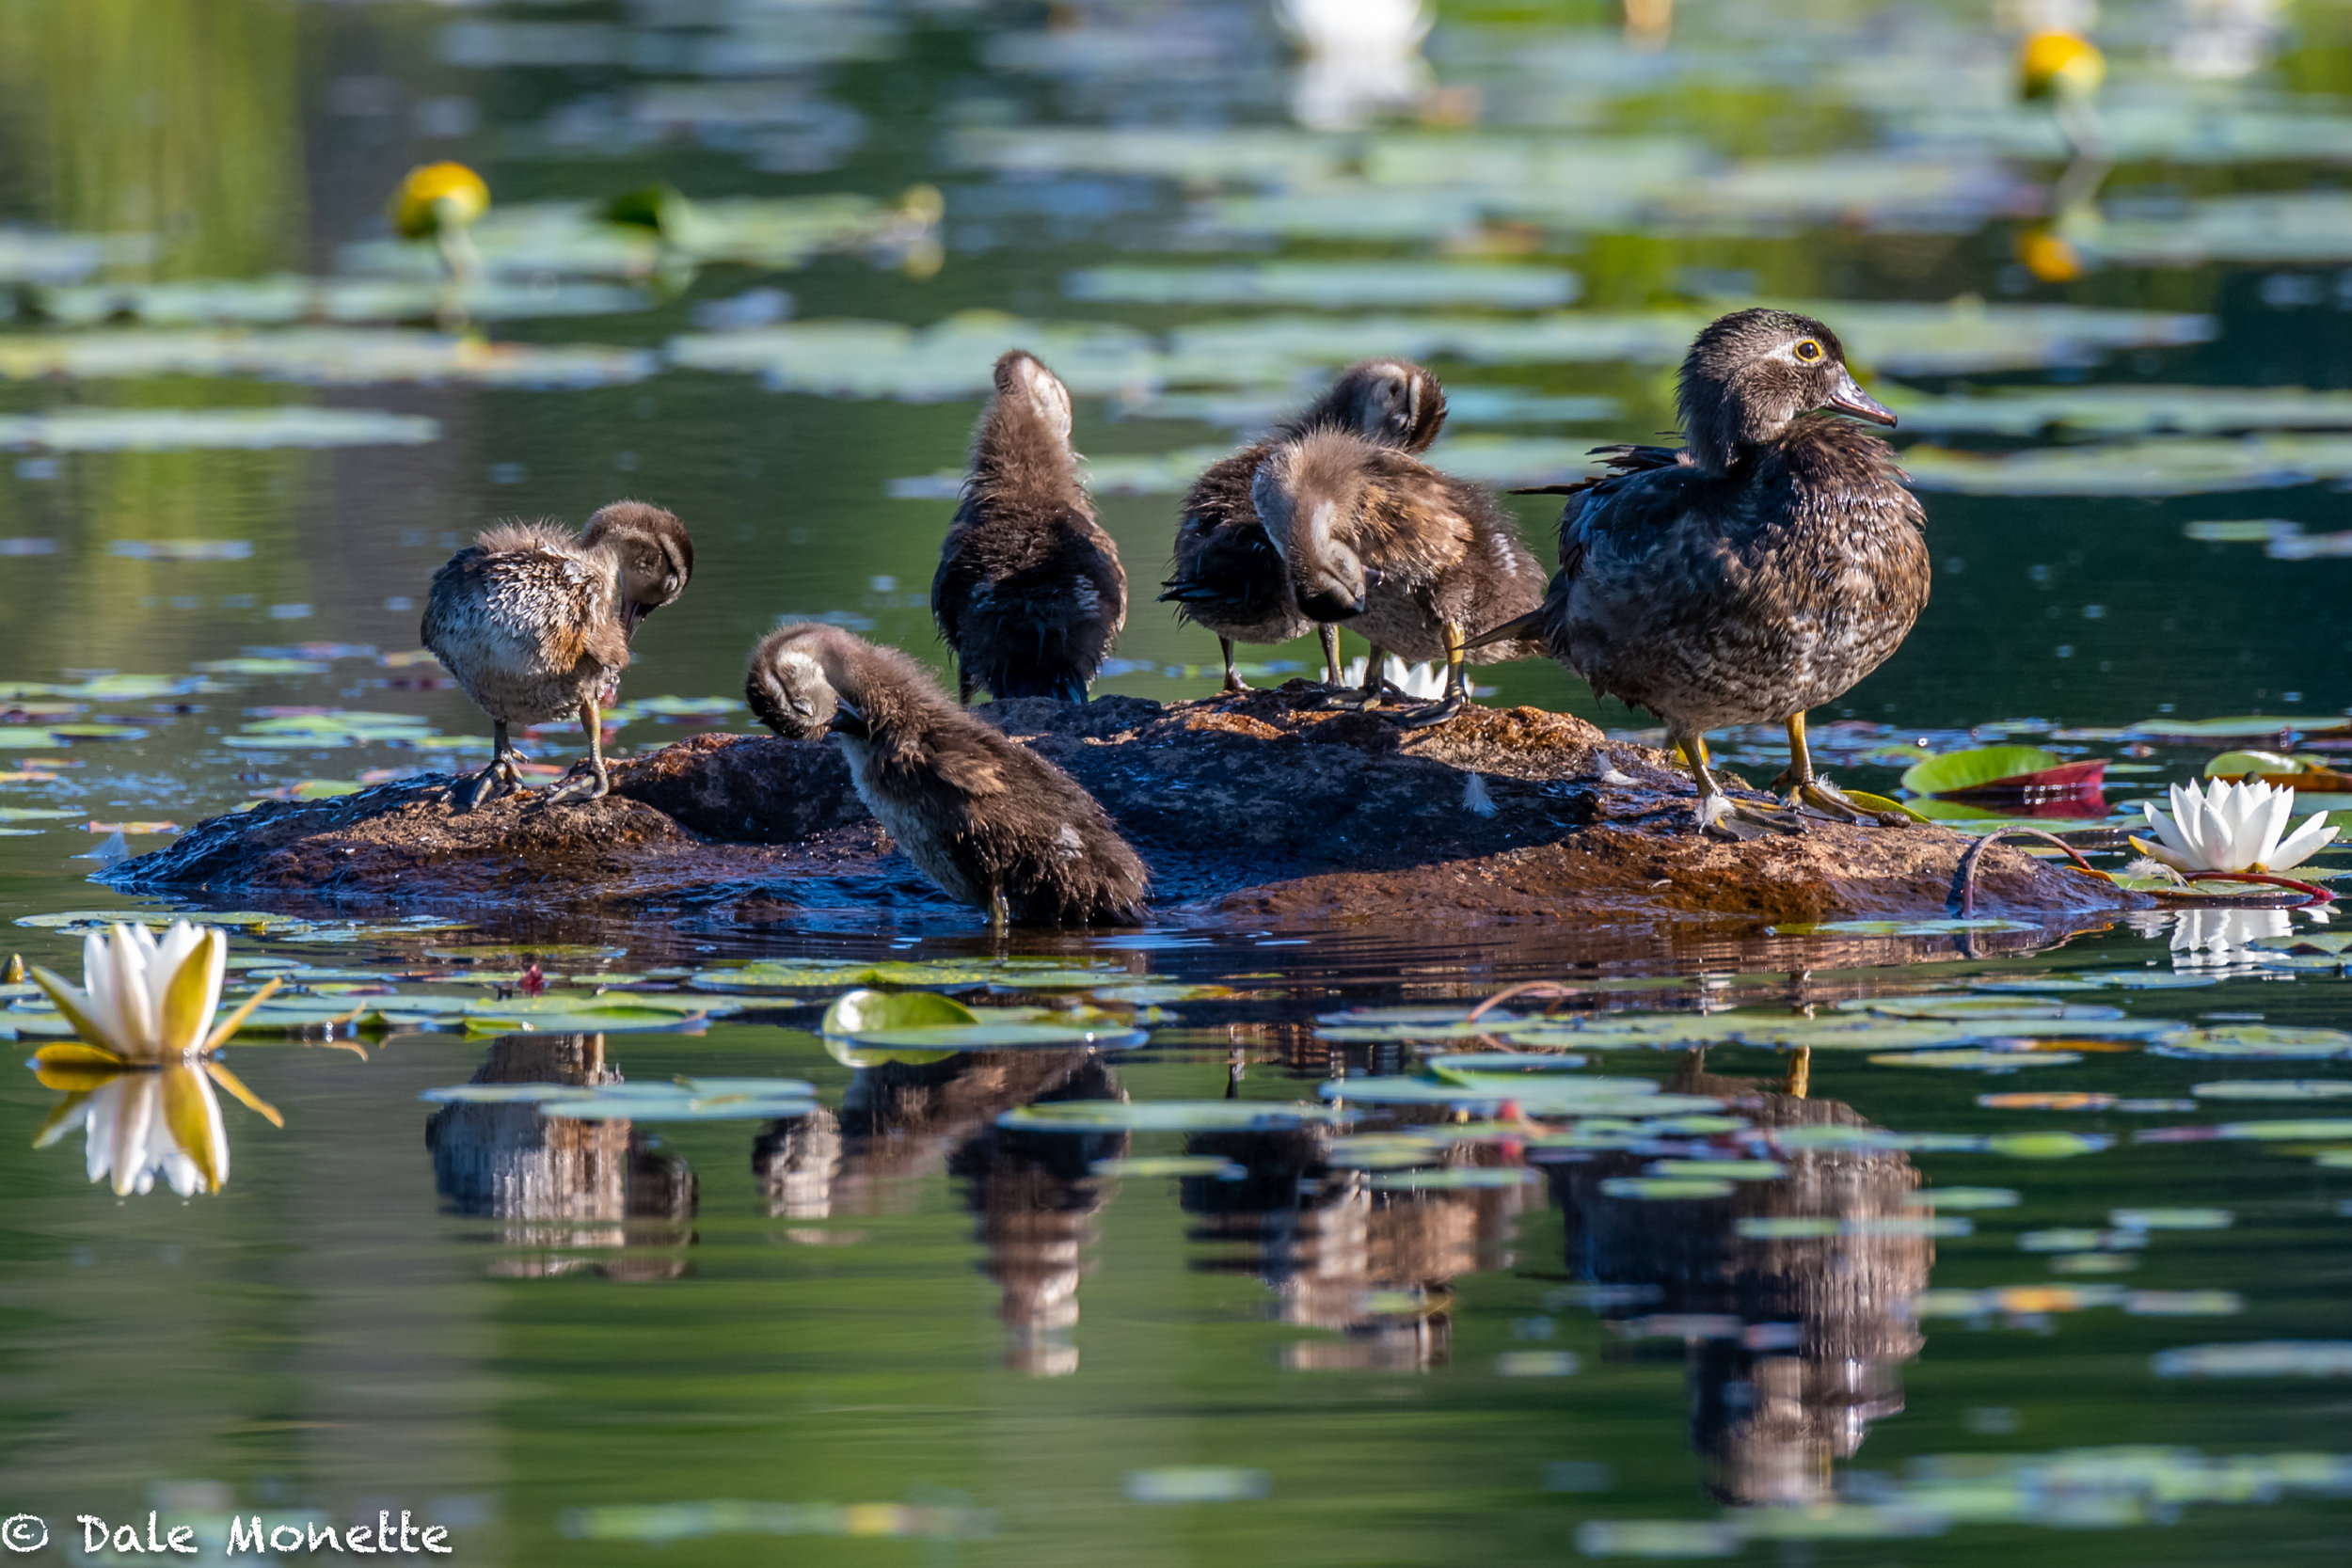   Wood duck chicks are getting bigger by the day. This family pulled up on a rock in front of me this morning and spent about 25 minutes preening and snoozing in the warm sun.  You gotta love ducklings….  